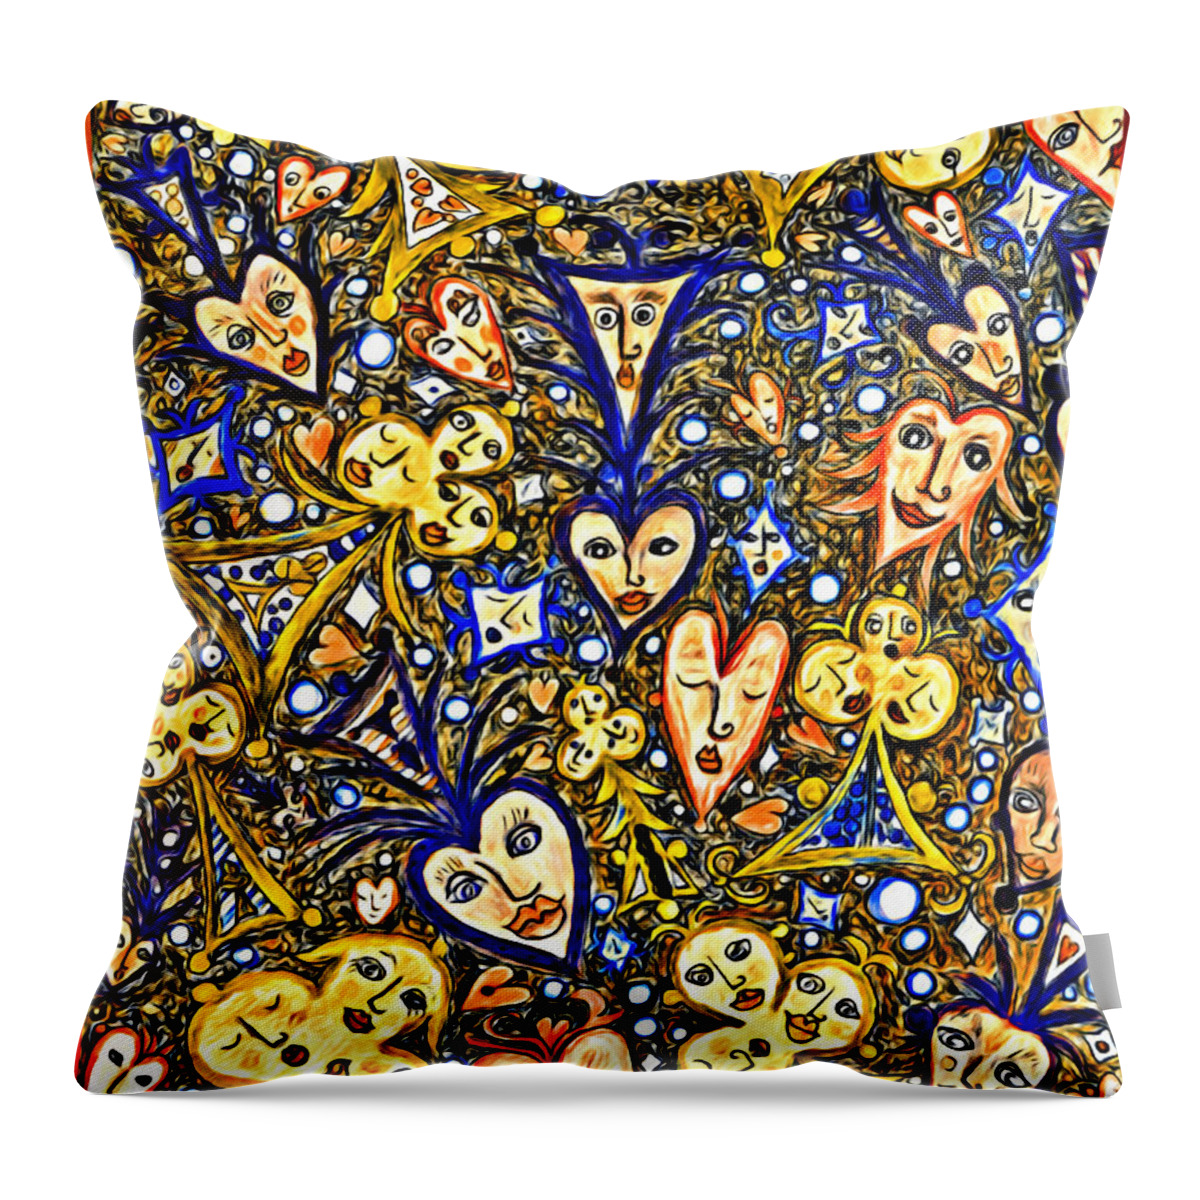 Lise Winne Throw Pillow featuring the digital art Card Game Symbols Blue and Yellow by Lise Winne